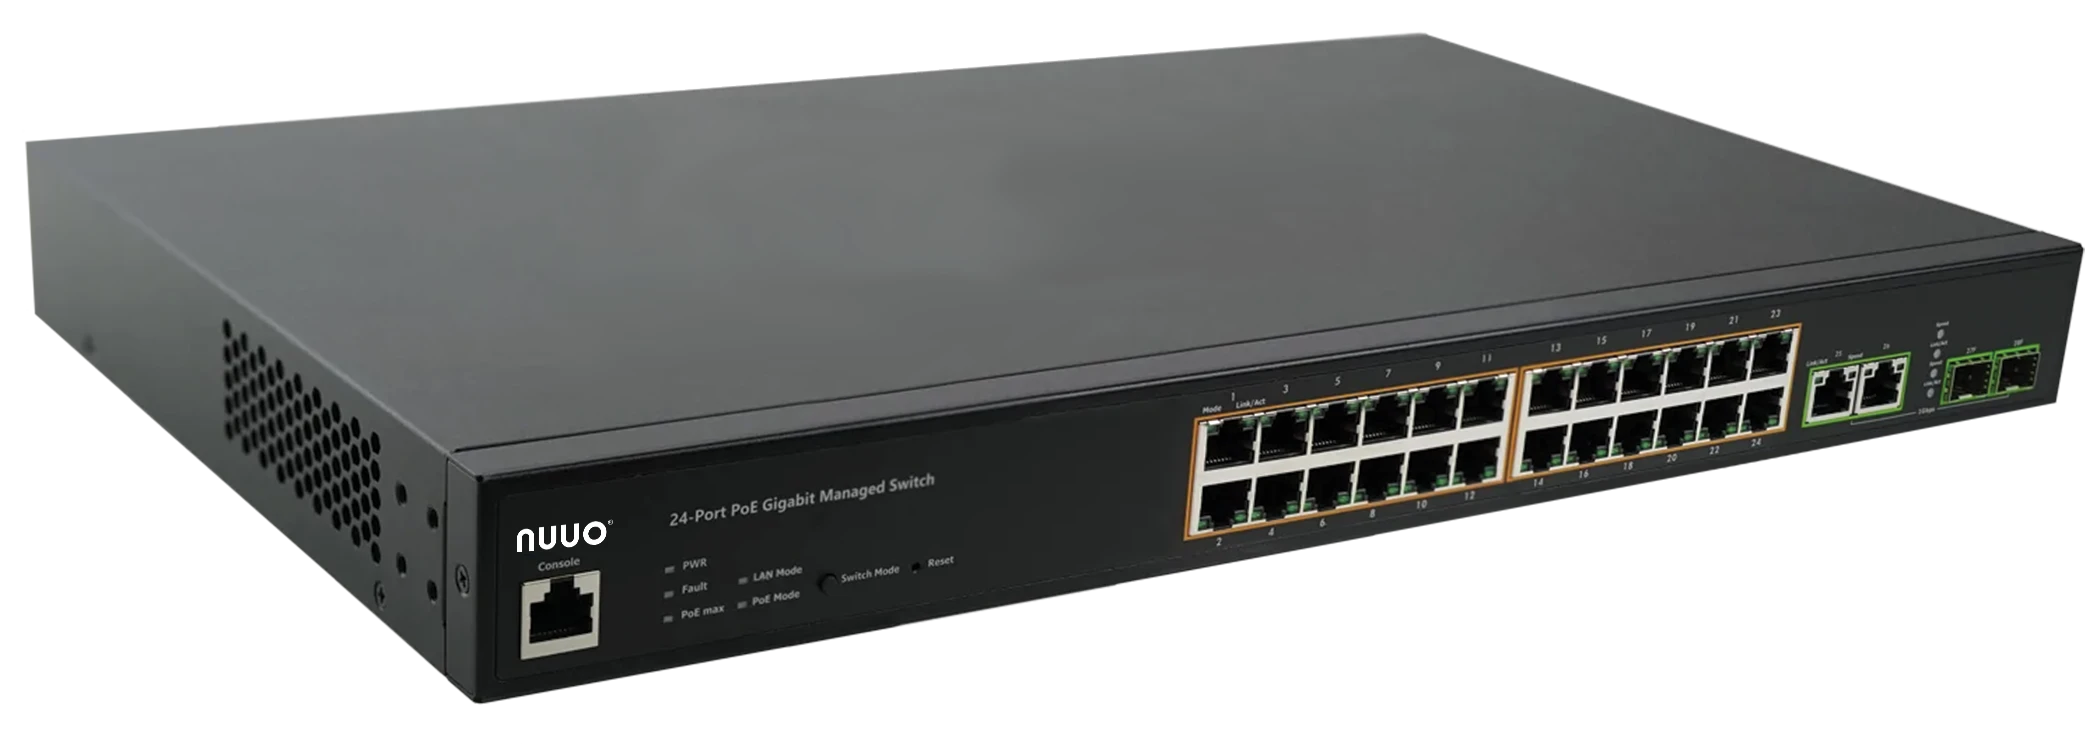 2187-n24poe-switch-product-image-front-tilt-1688077481121.png